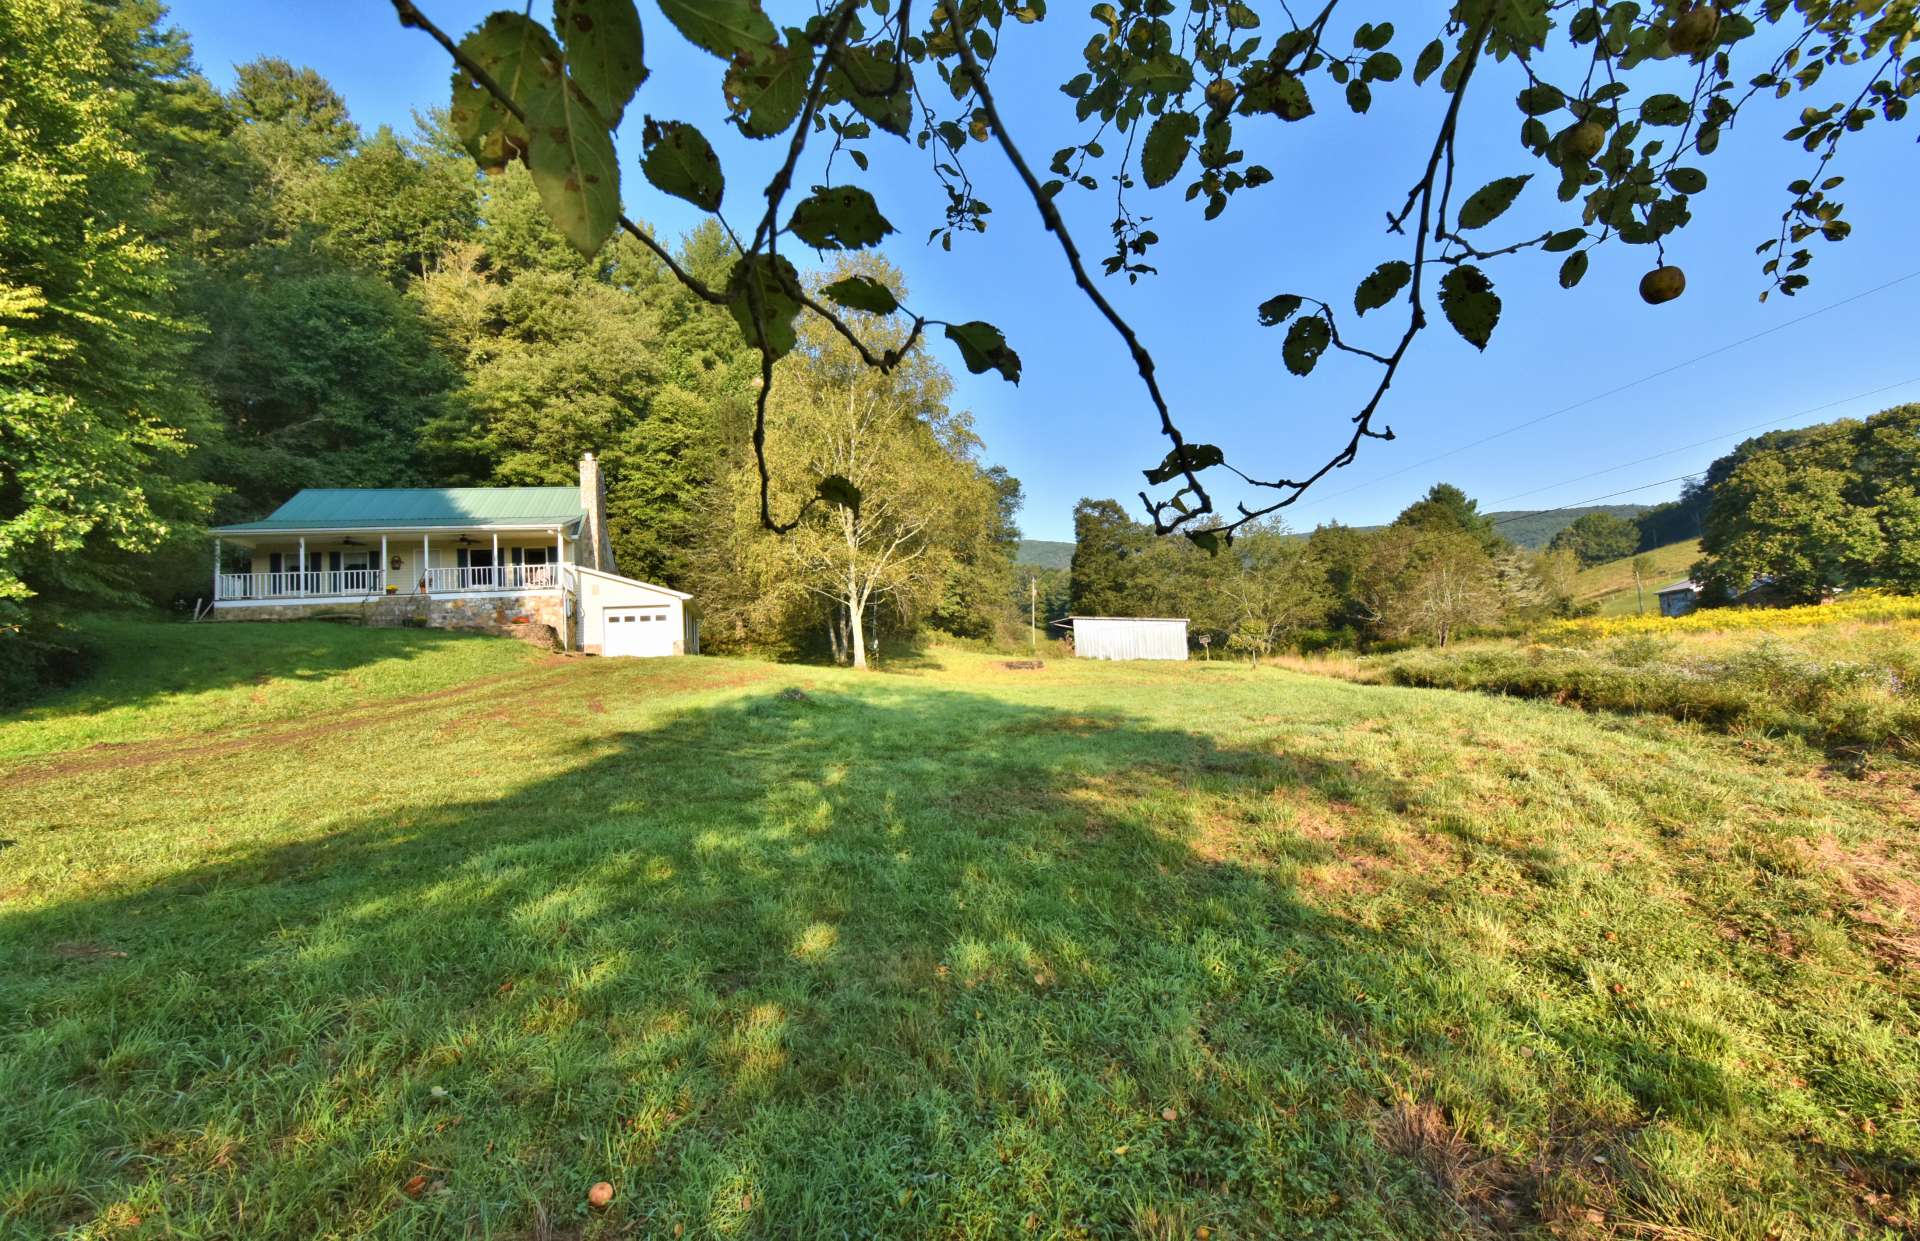 This storybook setting includes 5 acres of open pasture, creek, woodlands, barn, and abundant wildlife.